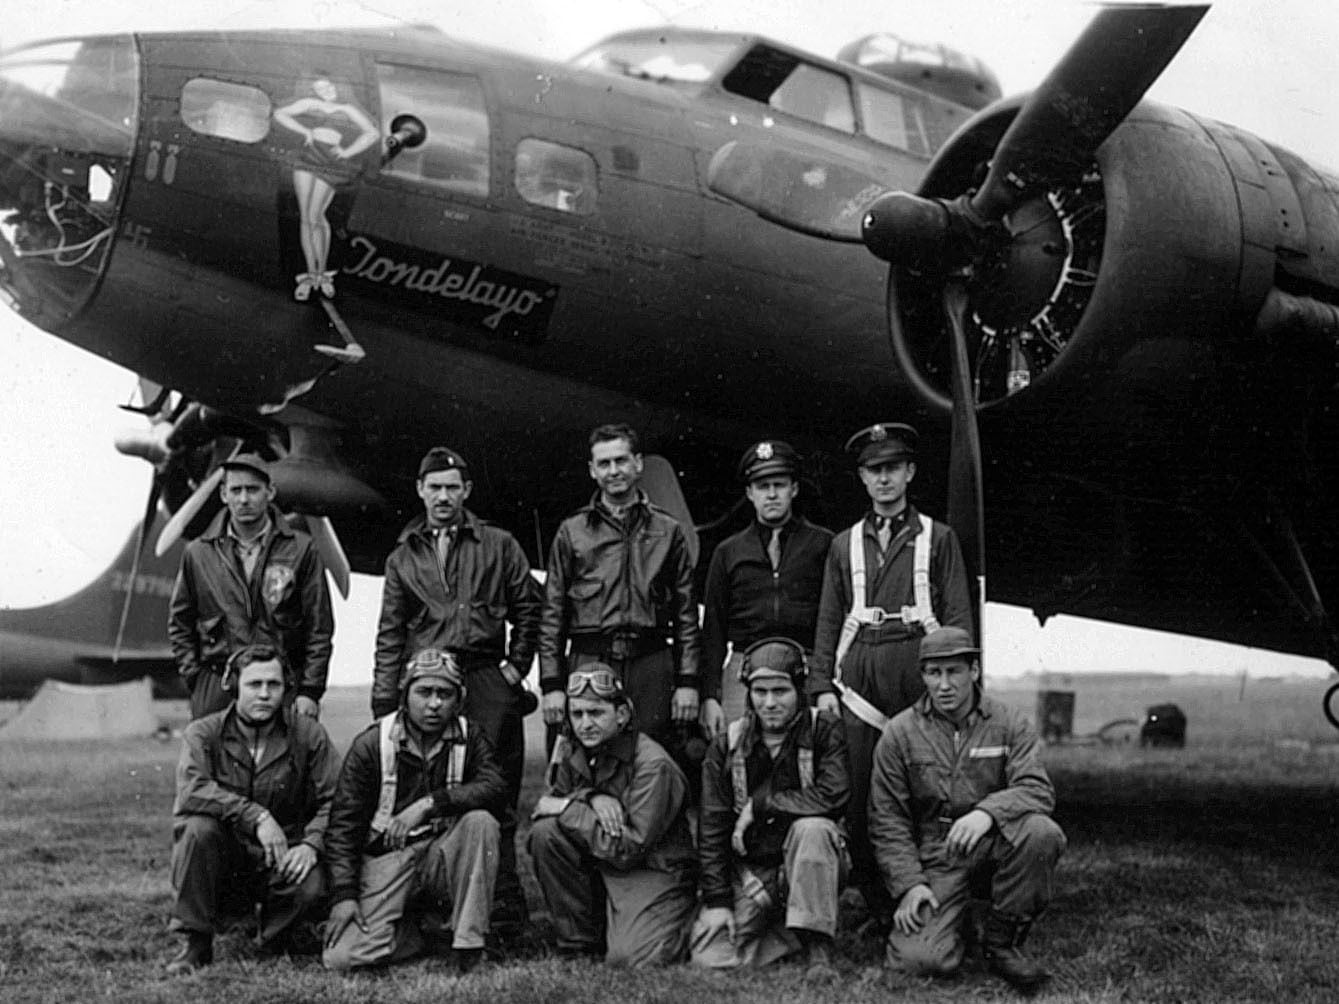 All we can do for you now': How Czech sabotage saved a B-17 crew